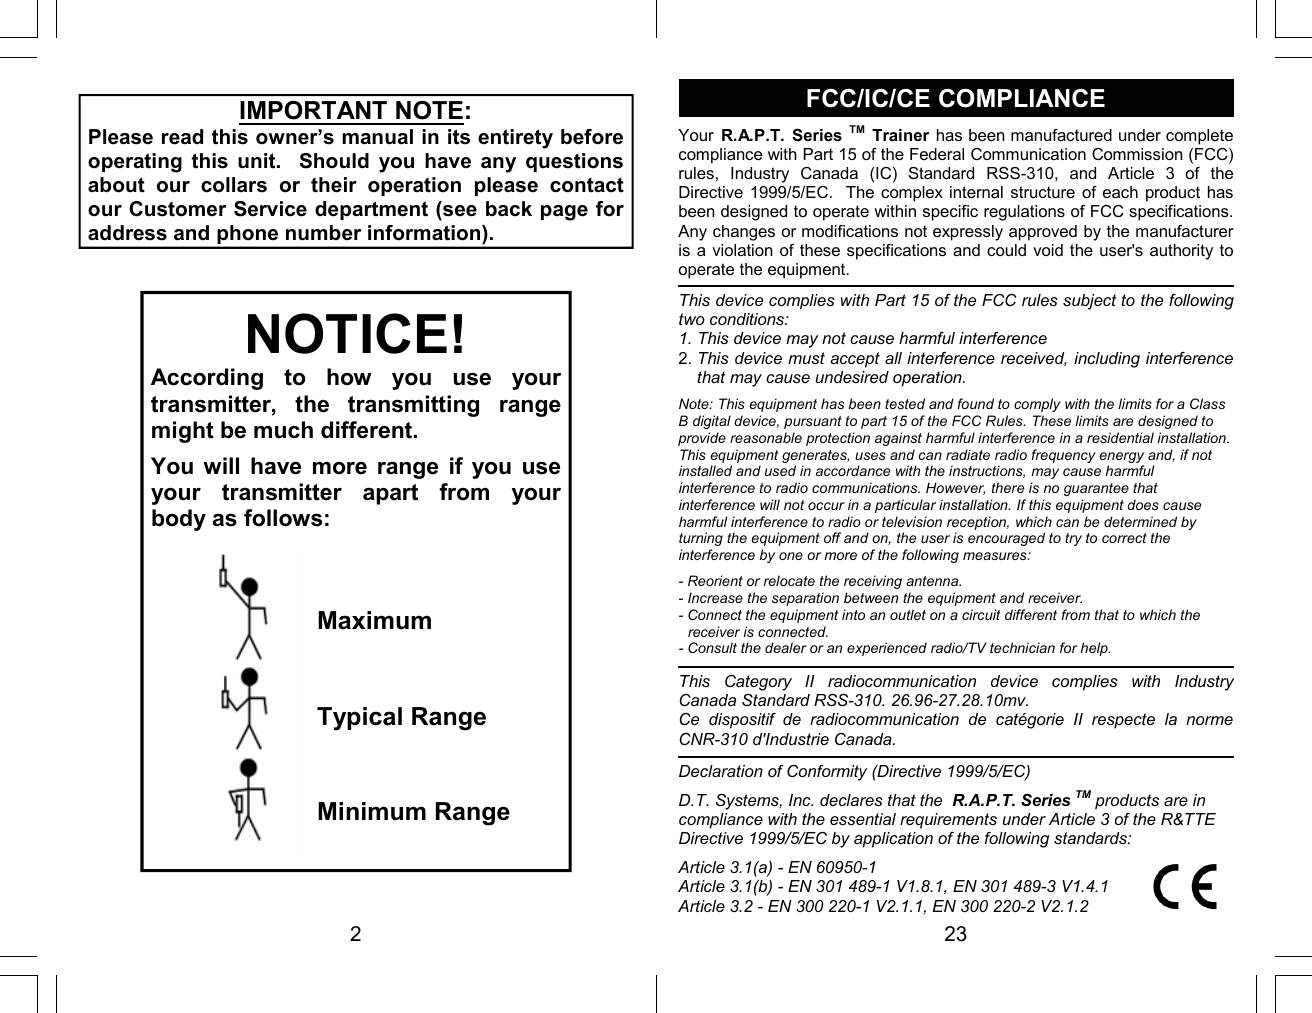 2 NOTICE! According  to  how  you  use  your transmitter,  the  transmitting  range might be much different.  You will  have  more  range  if  you  use your  transmitter  apart  from  your body as follows: Maximum Typical Range Minimum Range IMPORTANT NOTE: Please read this owner’s manual in its entirety before operating  this  unit.    Should  you  have  any  questions about  our  collars  or  their  operation  please  contact our Customer Service department (see back page for address and phone number information). 23 FCC/IC/CE COMPLIANCE Your  R.A.P.T.  Series TM Trainer  has been manufactured under complete compliance with Part 15 of the Federal Communication Commission (FCC) rules,  Industry  Canada  (IC)  Standard  RSS-310,  and  Article  3  of  the Directive 1999/5/EC.  The complex internal structure of each product has been designed to operate within specific regulations of FCC specifications.  Any changes or modifications not expressly approved by the manufacturer is a violation of these specifications and could void the user&apos;s authority to operate the equipment. This device complies with Part 15 of the FCC rules subject to the following two conditions: 1. This device may not cause harmful interference 2. This device must accept all interference received, including interference that may cause undesired operation.  Note: This equipment has been tested and found to comply with the limits for a Class B digital device, pursuant to part 15 of the FCC Rules. These limits are designed to provide reasonable protection against harmful interference in a residential installation. This equipment generates, uses and can radiate radio frequency energy and, if not installed and used in accordance with the instructions, may cause harmful interference to radio communications. However, there is no guarantee that interference will not occur in a particular installation. If this equipment does cause harmful interference to radio or television reception, which can be determined by turning the equipment off and on, the user is encouraged to try to correct the interference by one or more of the following measures:  - Reorient or relocate the receiving antenna. - Increase the separation between the equipment and receiver. - Connect the equipment into an outlet on a circuit different from that to which the receiver is connected. - Consult the dealer or an experienced radio/TV technician for help.  This  Category  II  radiocommunication  device  complies  with  Industry Canada Standard RSS-310. 26.96-27.28.10mv. Ce  dispositif  de  radiocommunication  de  catégorie  II  respecte  la  norme CNR-310 d&apos;Industrie Canada. Declaration of Conformity (Directive 1999/5/EC)  D.T. Systems, Inc. declares that the  R.A.P.T. Series TM products are in compliance with the essential requirements under Article 3 of the R&amp;TTE Directive 1999/5/EC by application of the following standards:  Article 3.1(a) - EN 60950-1 Article 3.1(b) - EN 301 489-1 V1.8.1, EN 301 489-3 V1.4.1 Article 3.2 - EN 300 220-1 V2.1.1, EN 300 220-2 V2.1.2 